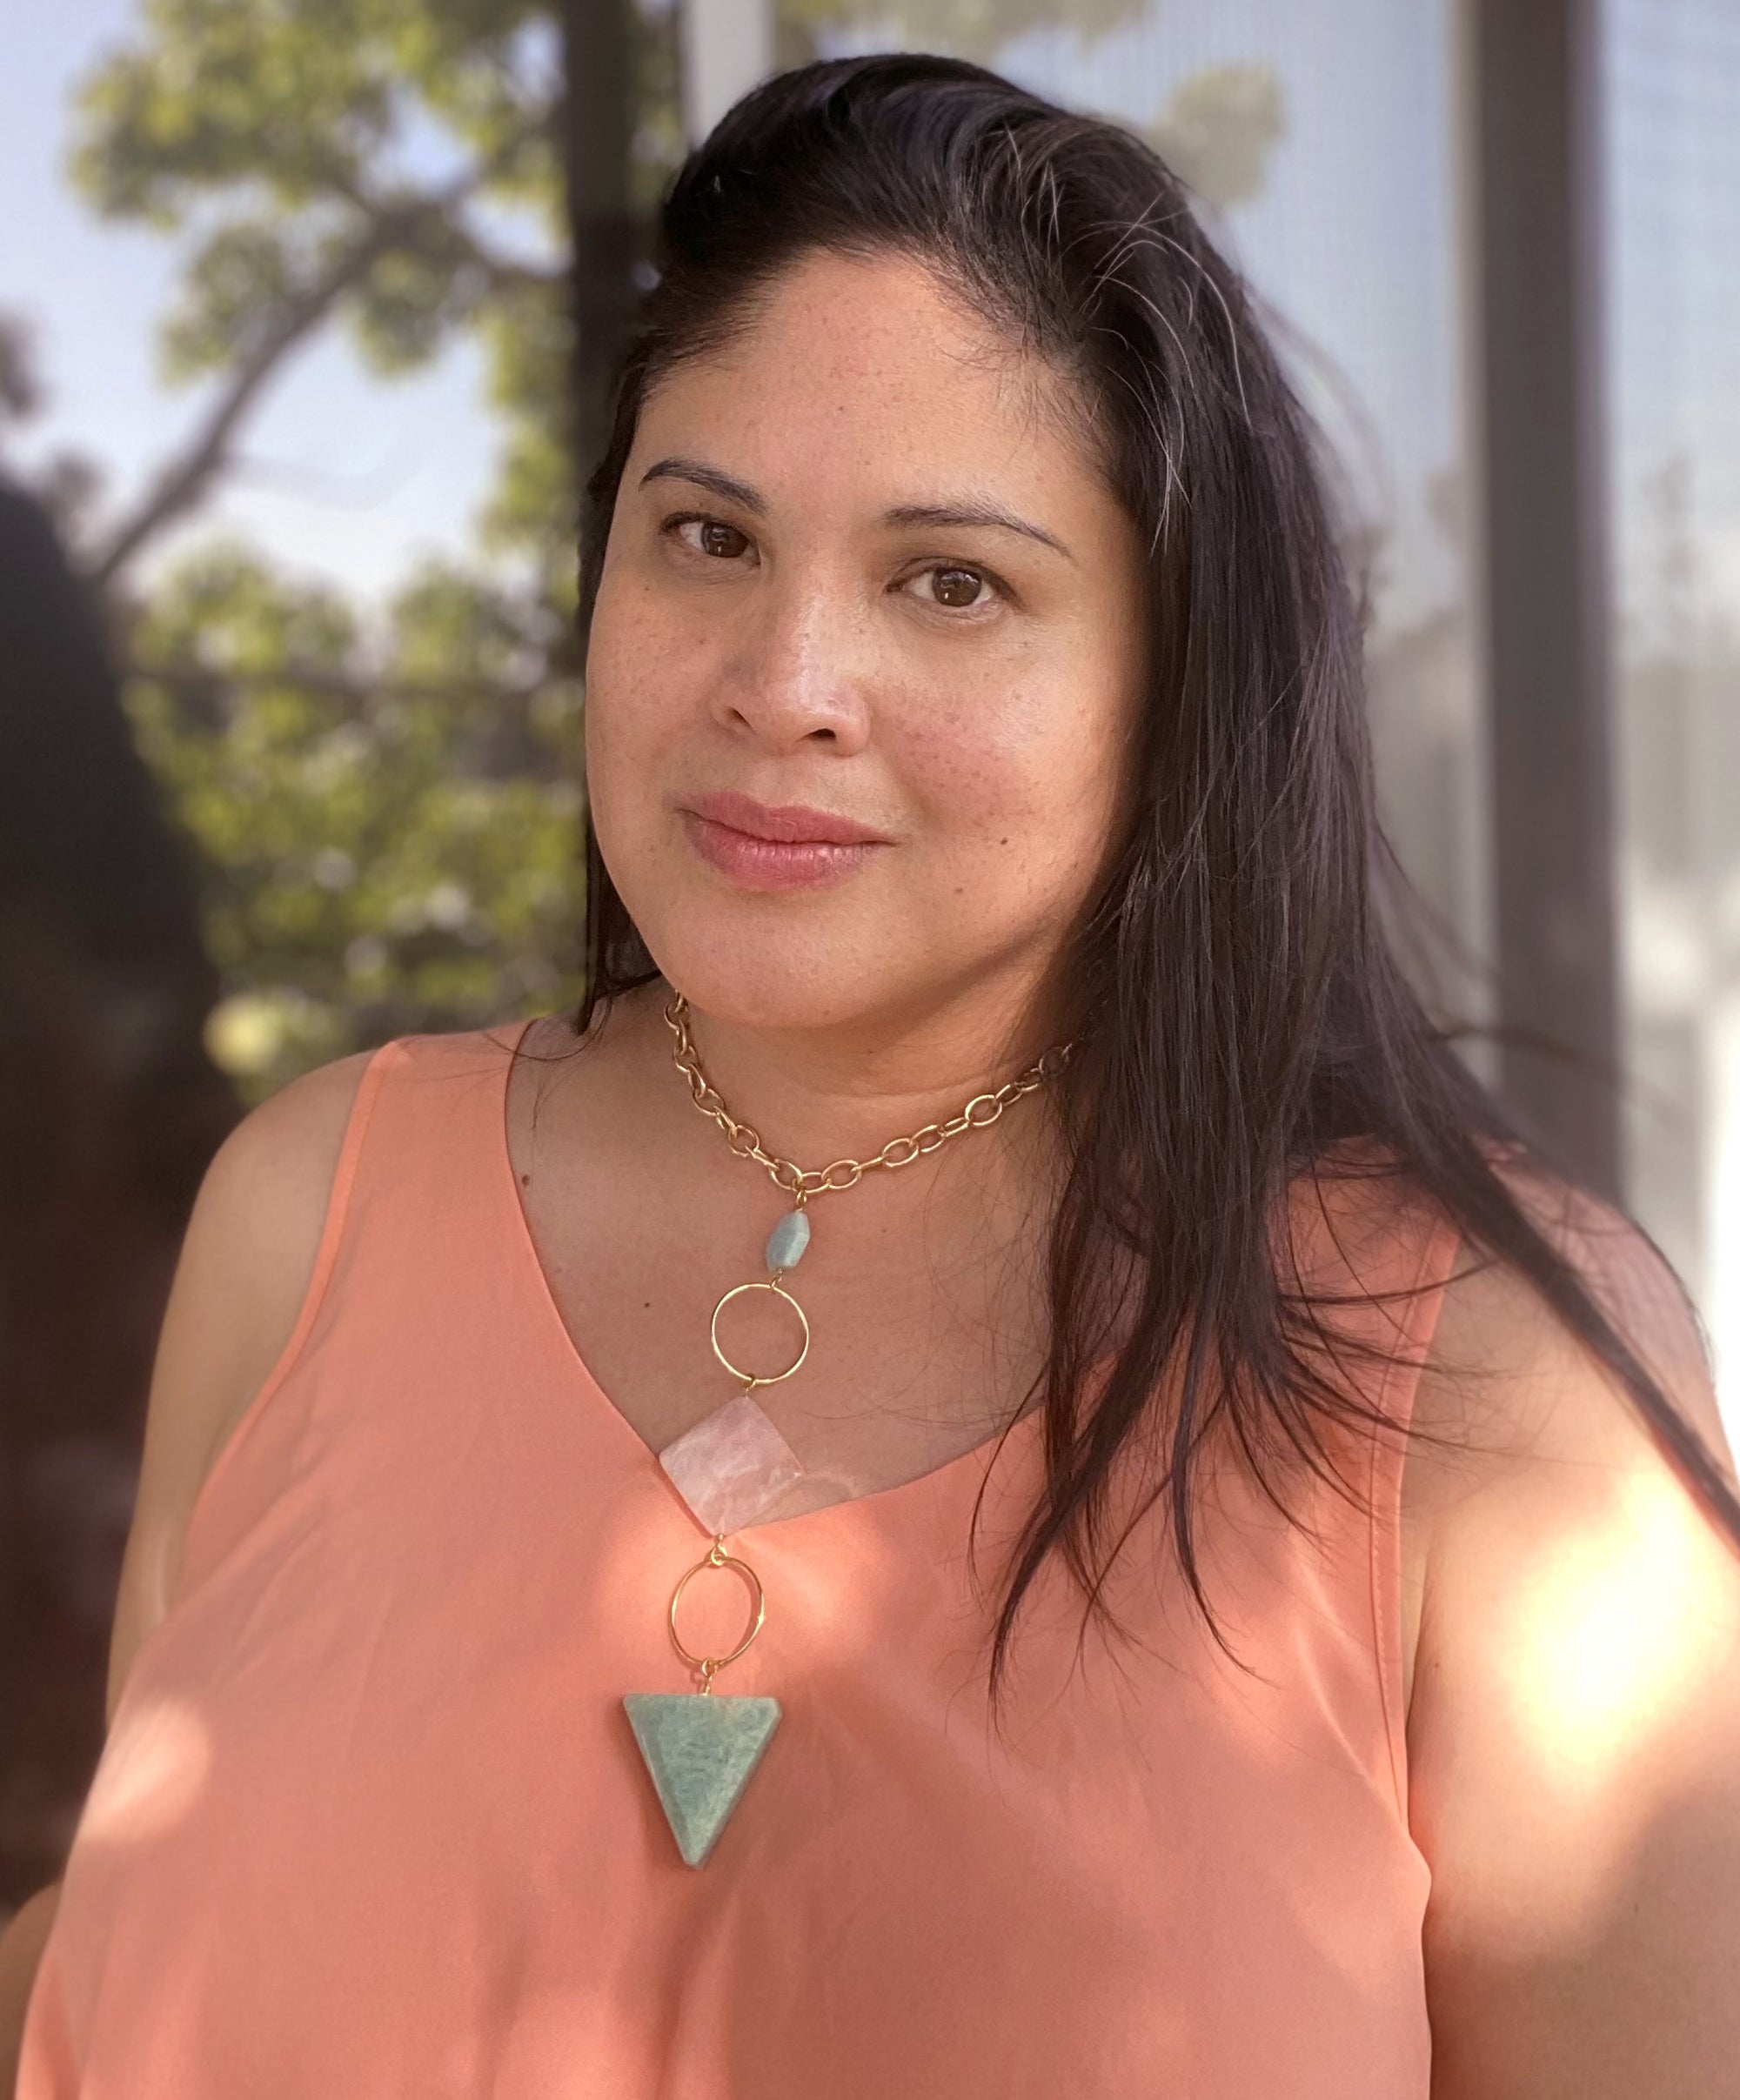 Jenny Dayco wearing a gioia rose quartz and amazonite necklace